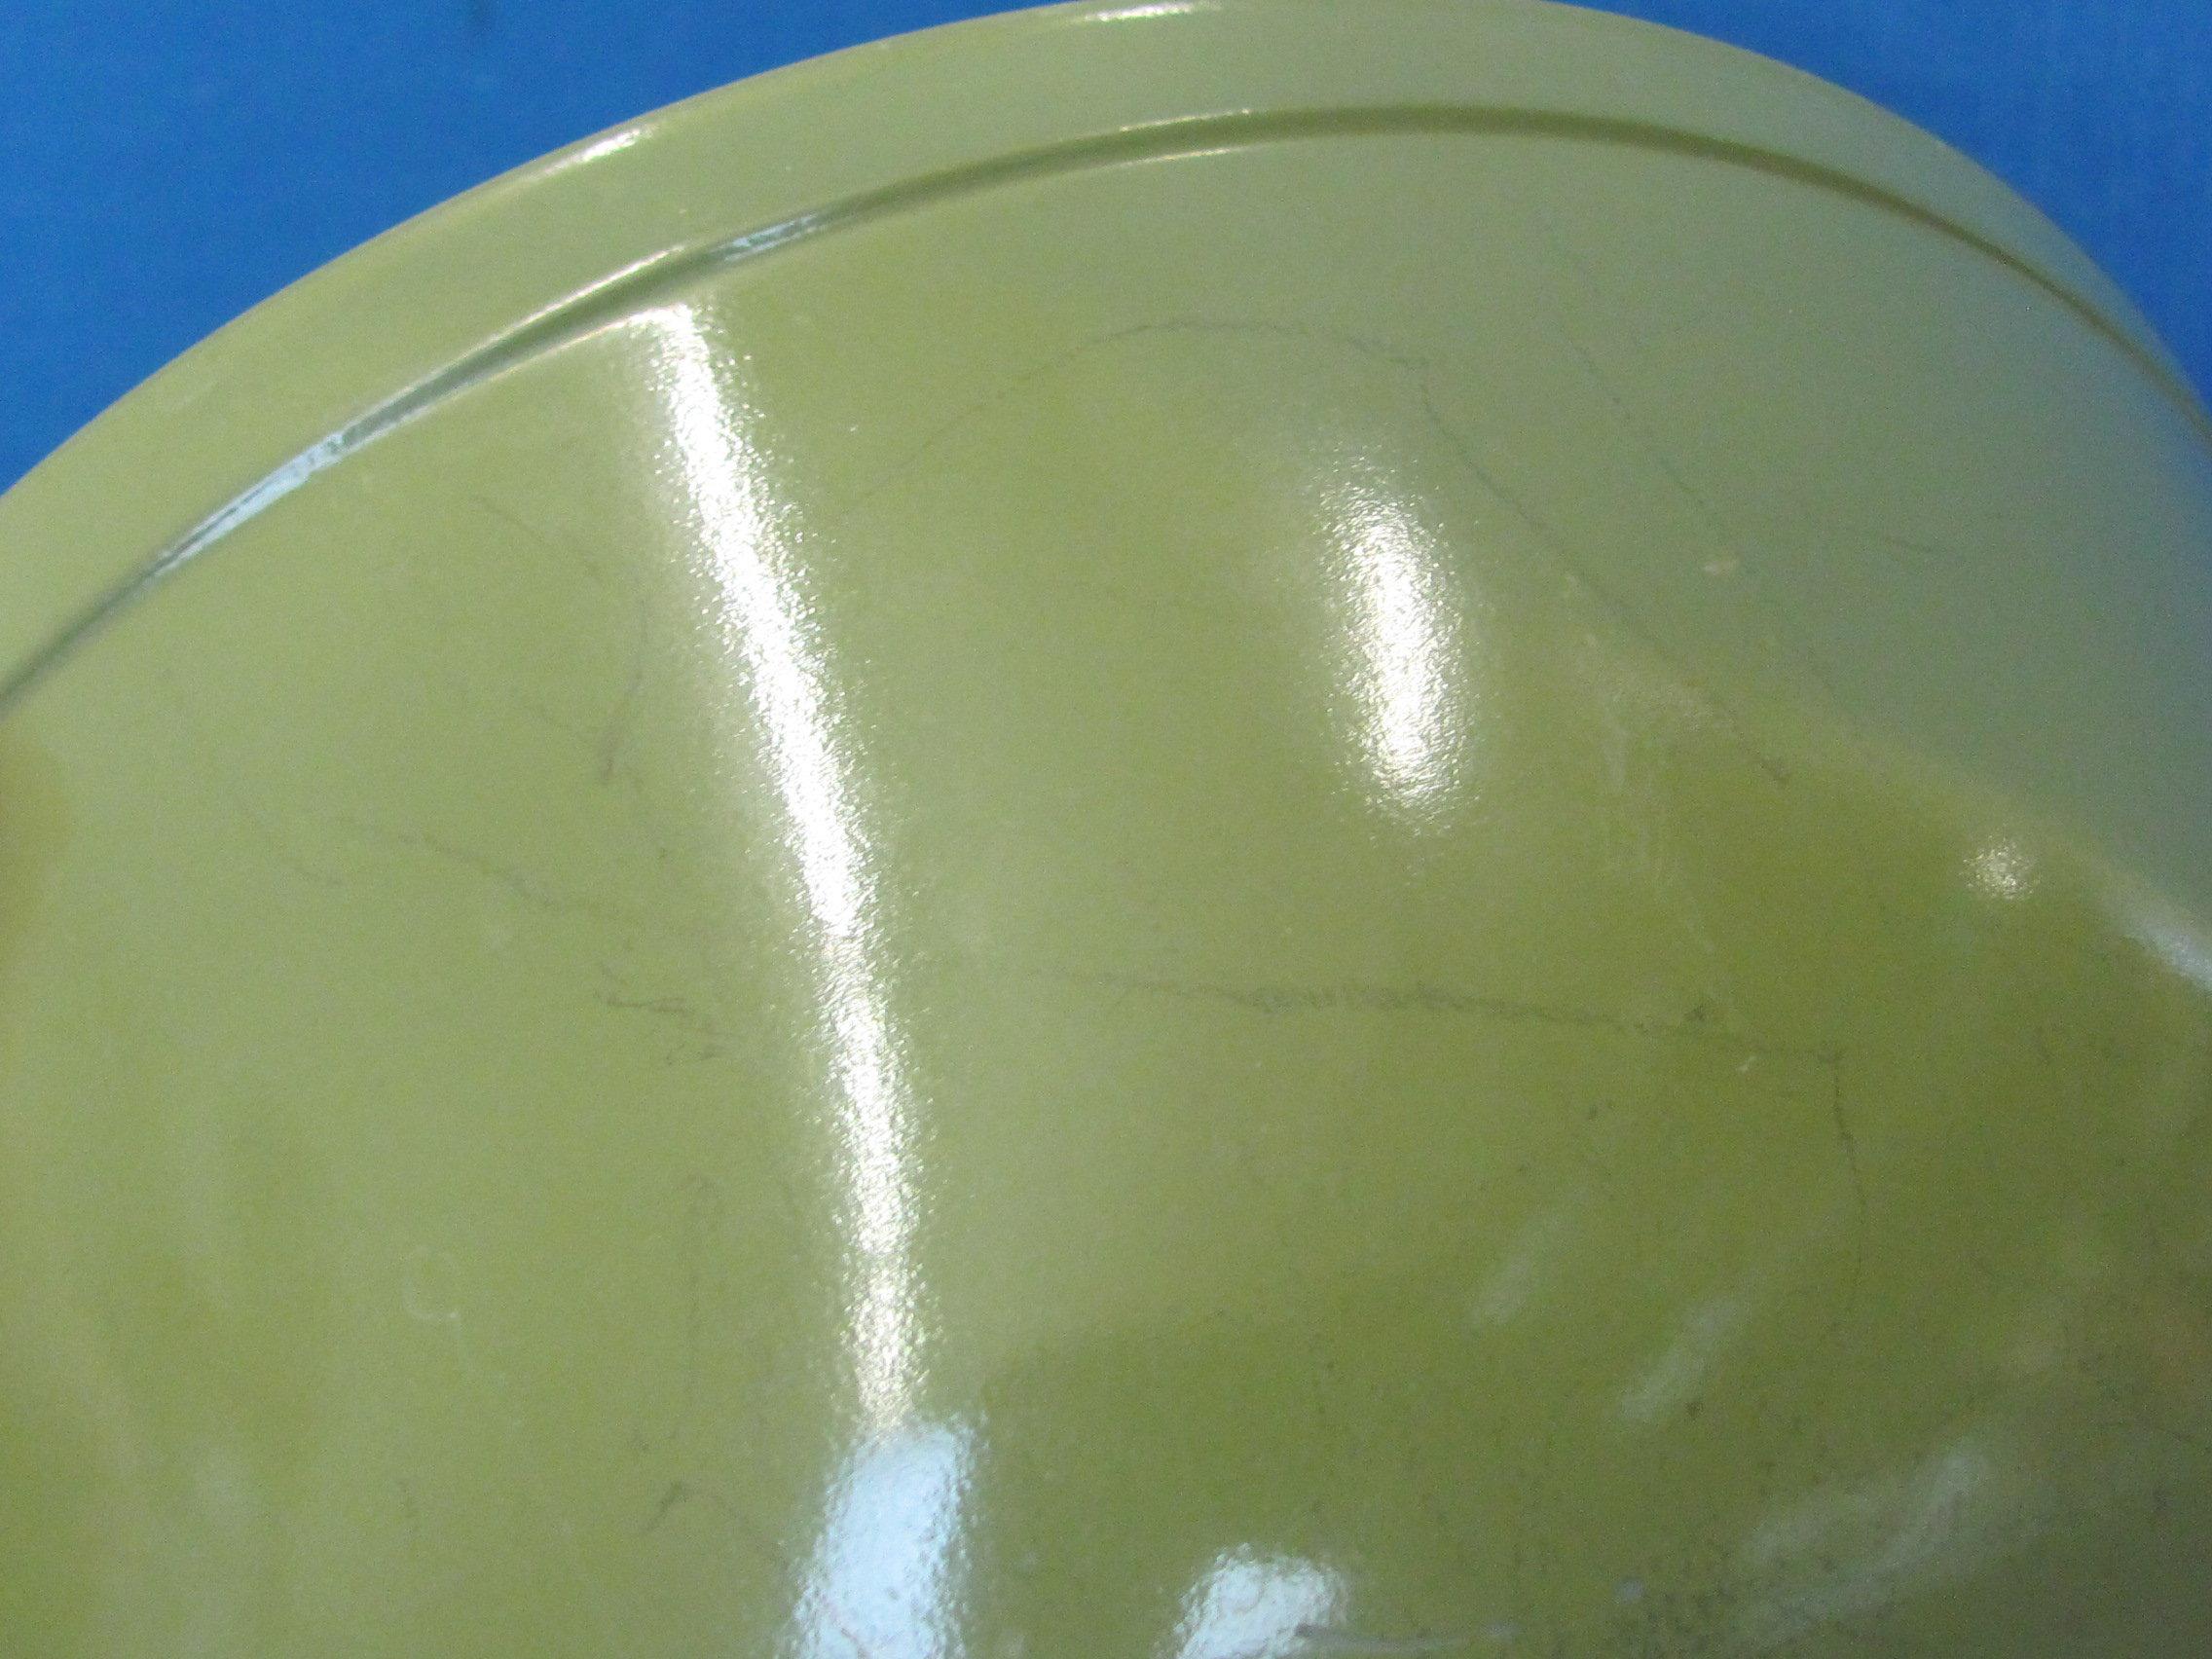 3 Piece Pyrex Mixing Bowl Set – Shades of Green/Yellow – 5 3/4” to 8 3/4” in diameter